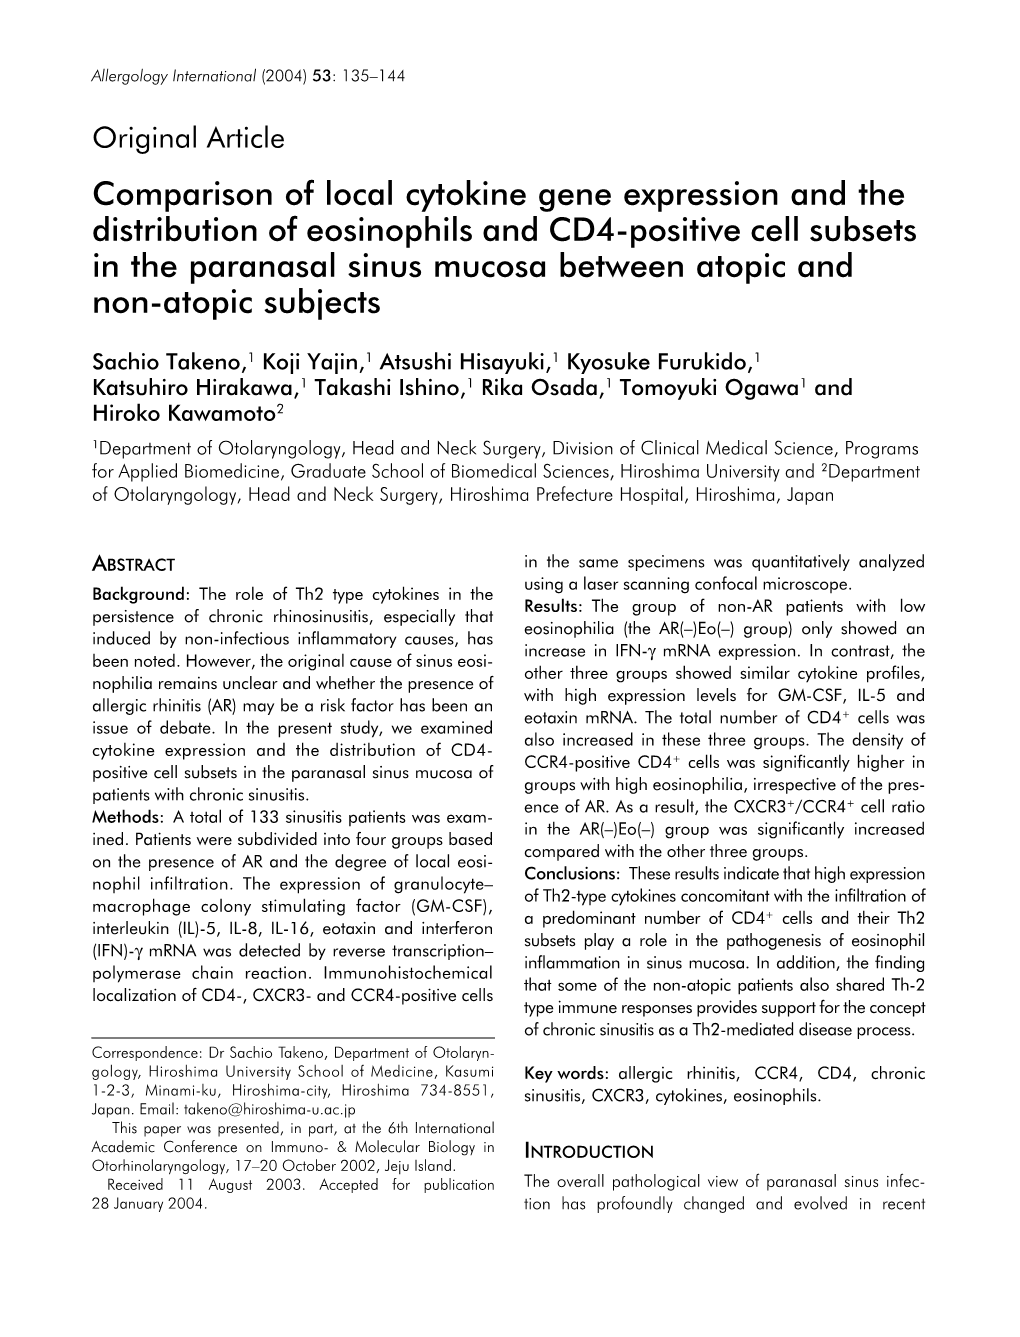 Comparison of Local Cytokine Gene Expression and the Distribution Of